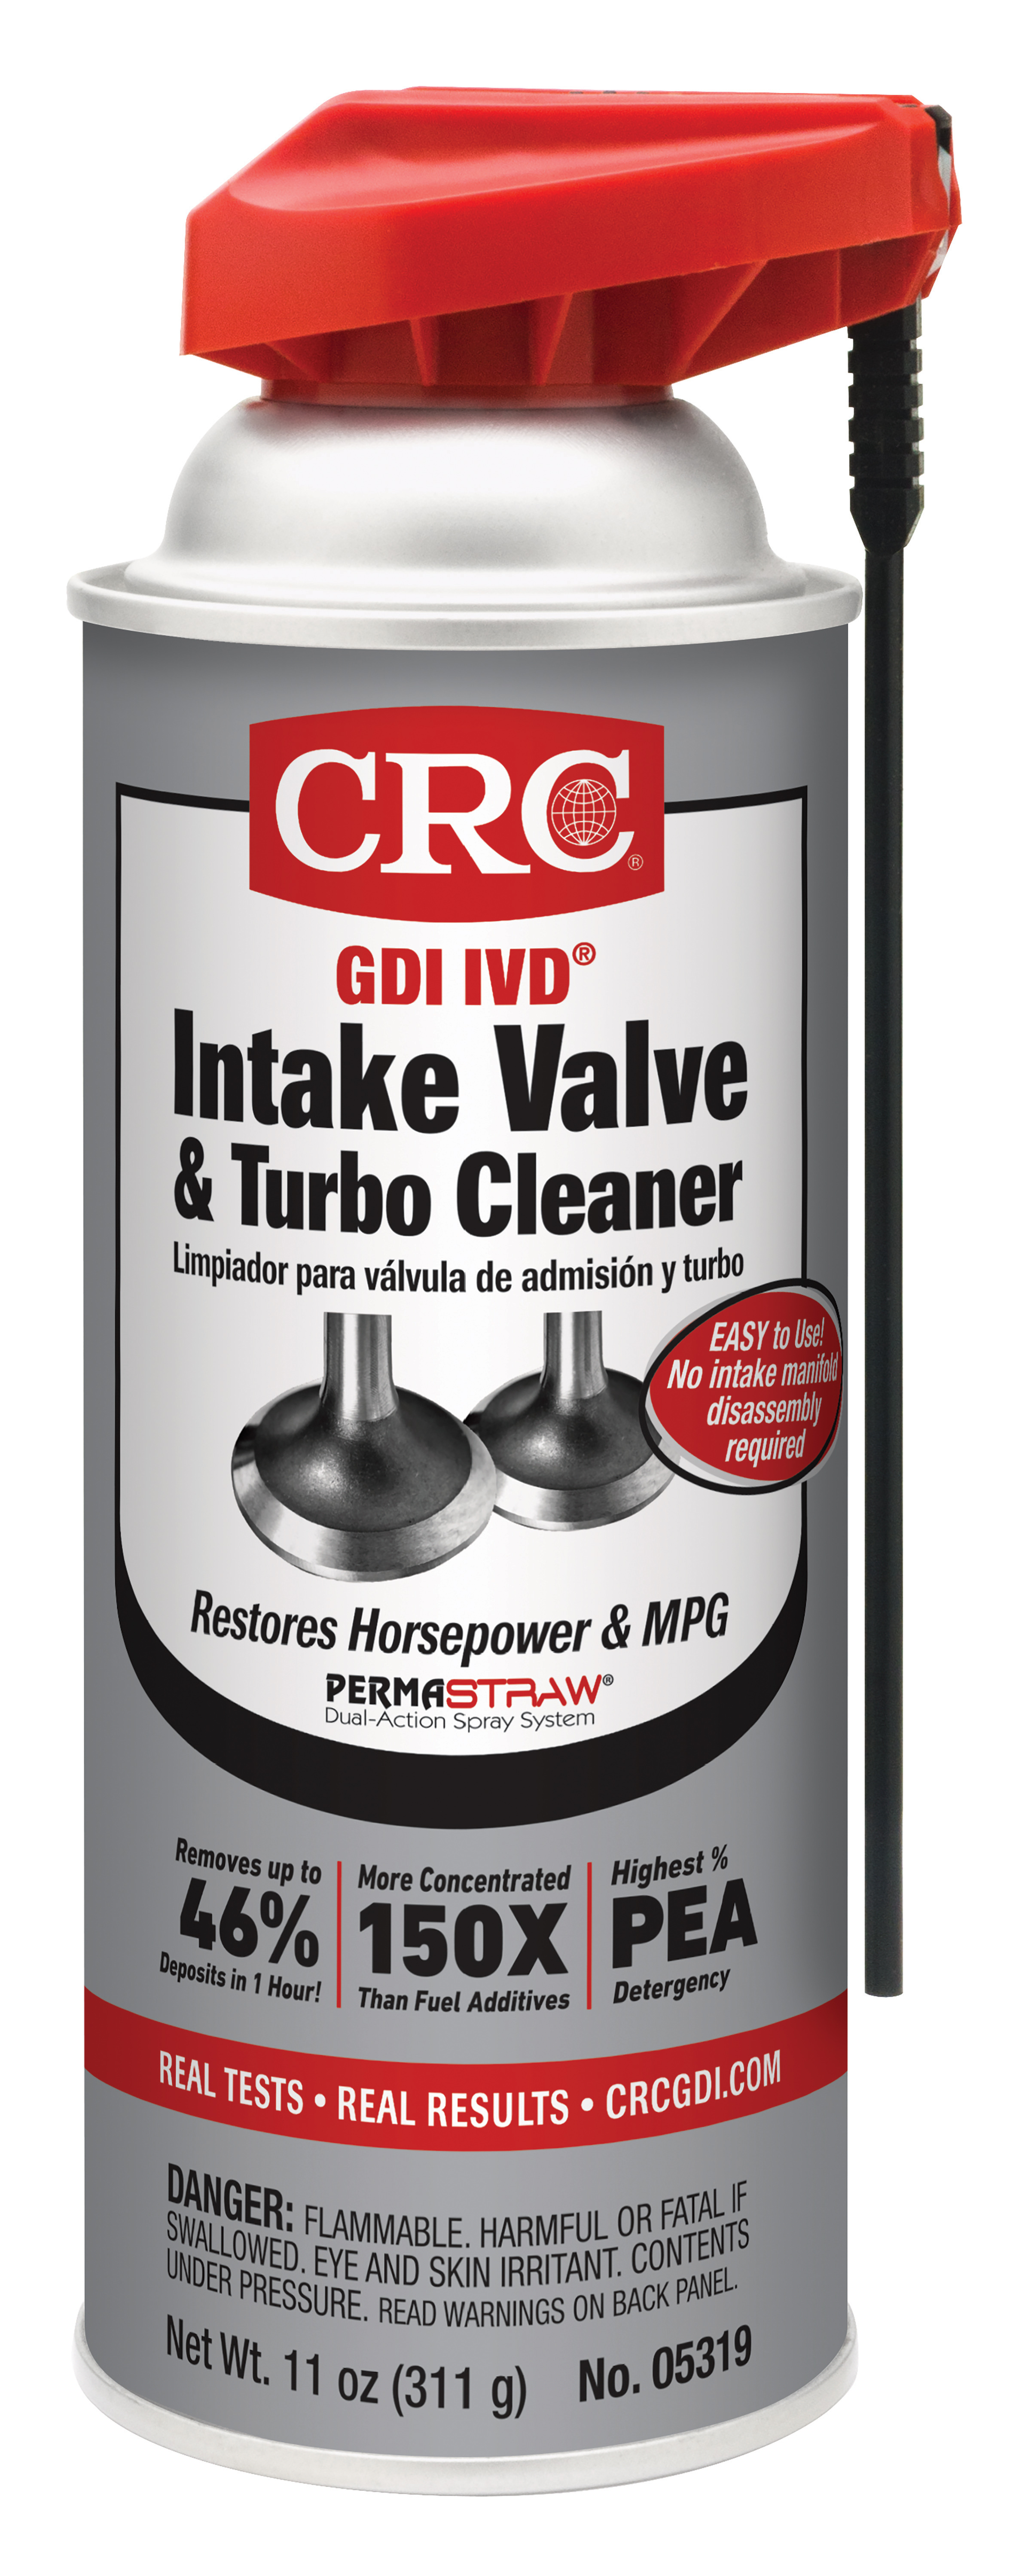 CRC Industries' GDI IVD Intake Valve & Turbo Cleaner to Debut at 2016 AAPEX  and SEMA Shows